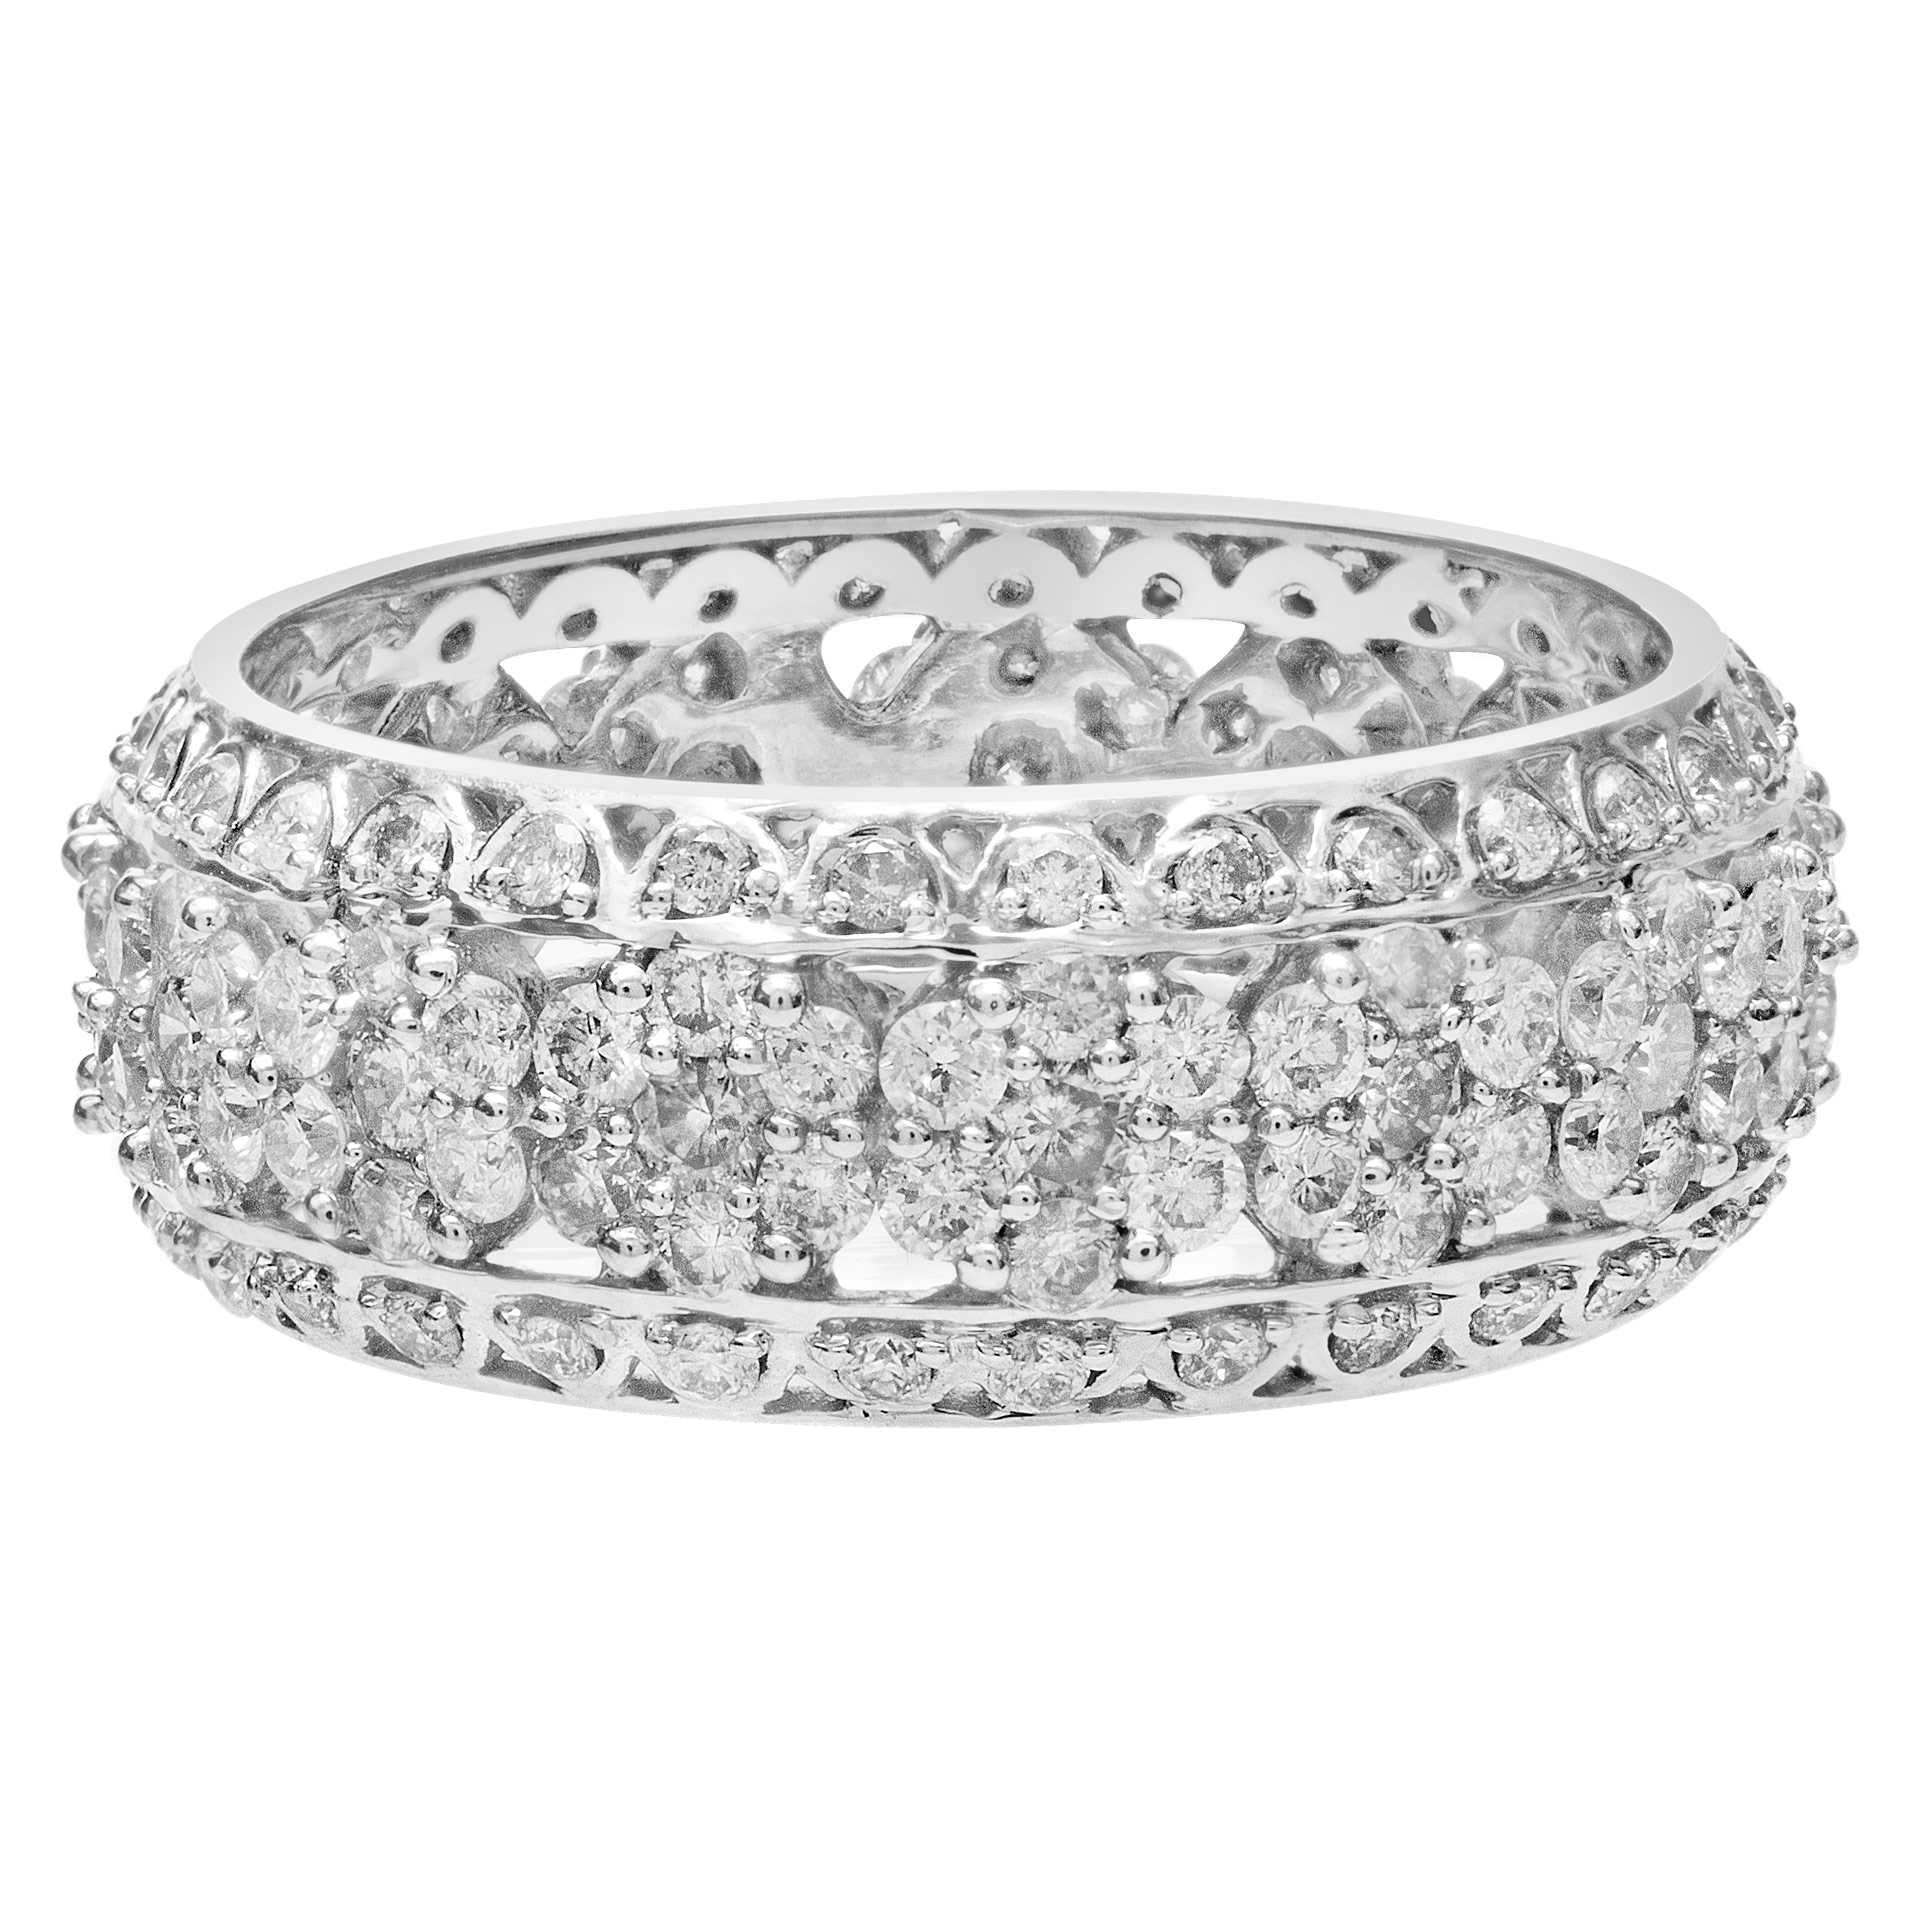 Diamond Eternity Band and Ring Charming Floral. 3.00 carats in diamonds. Size 9 image 1